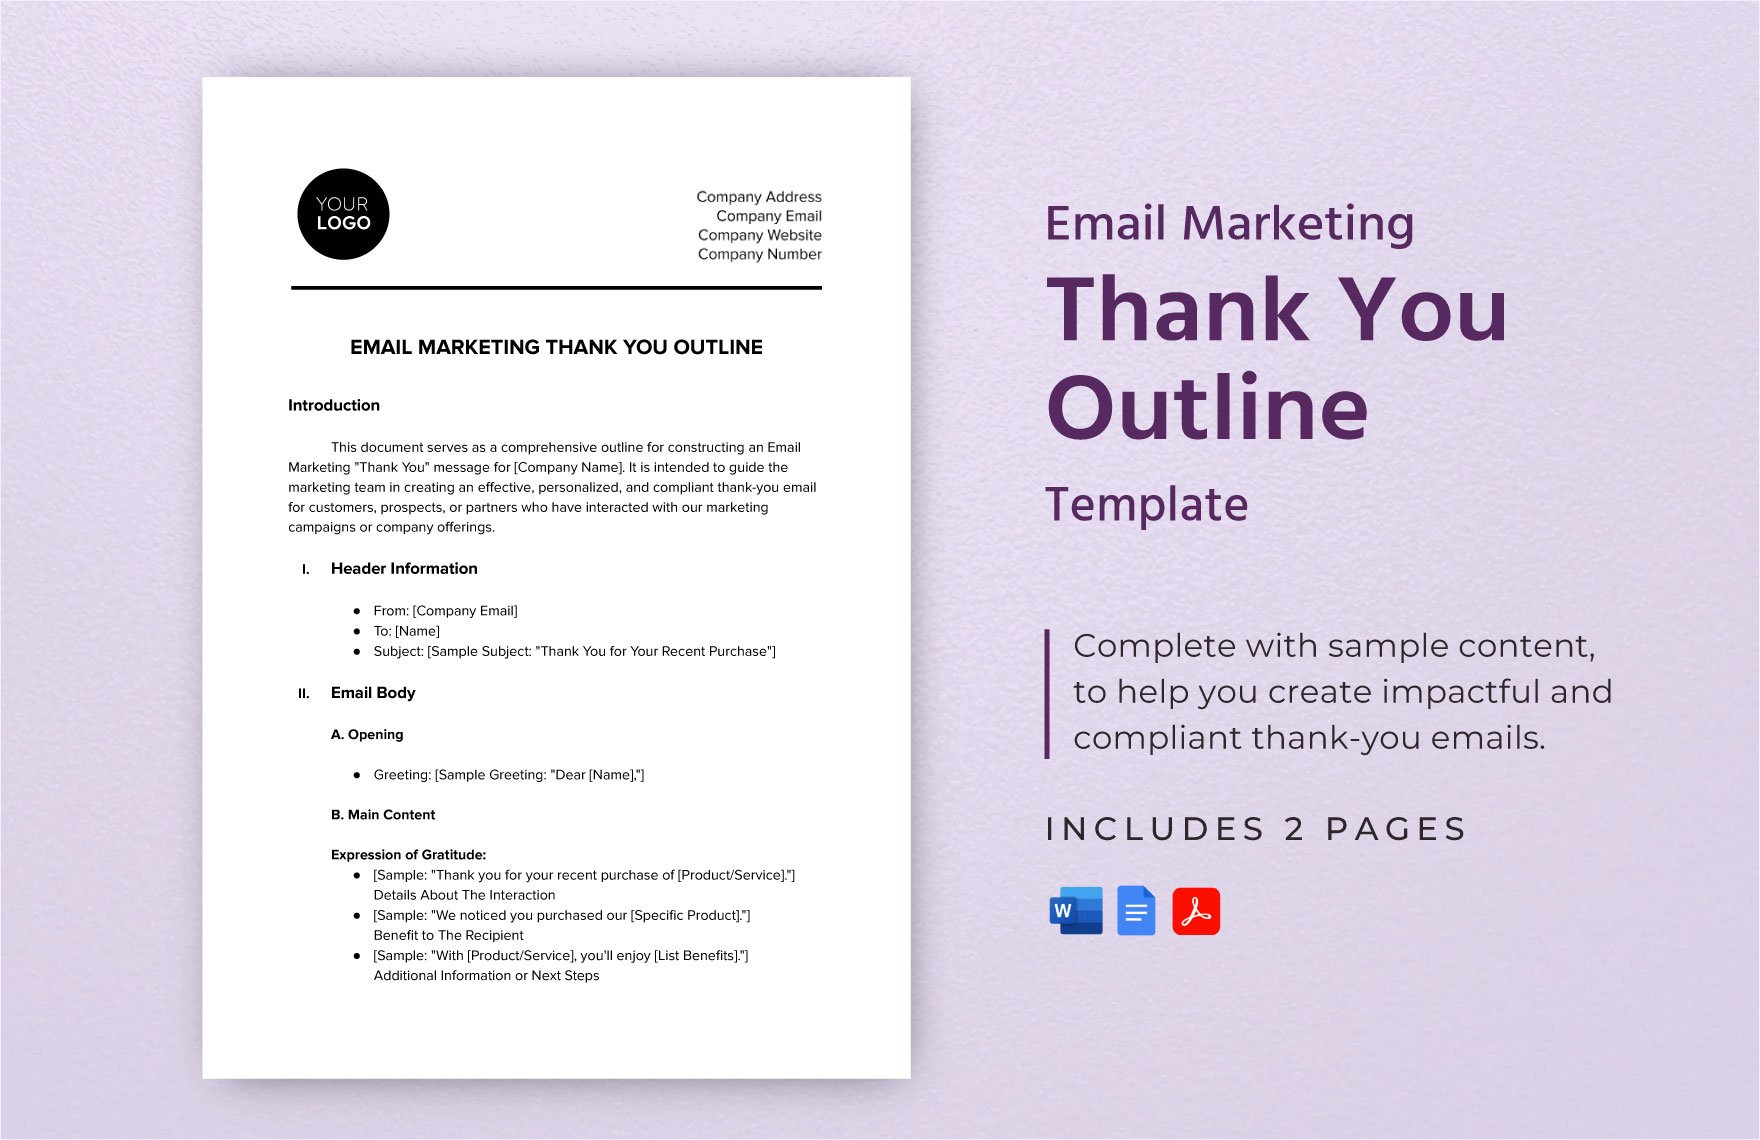 Email Marketing Thank You Outline Template